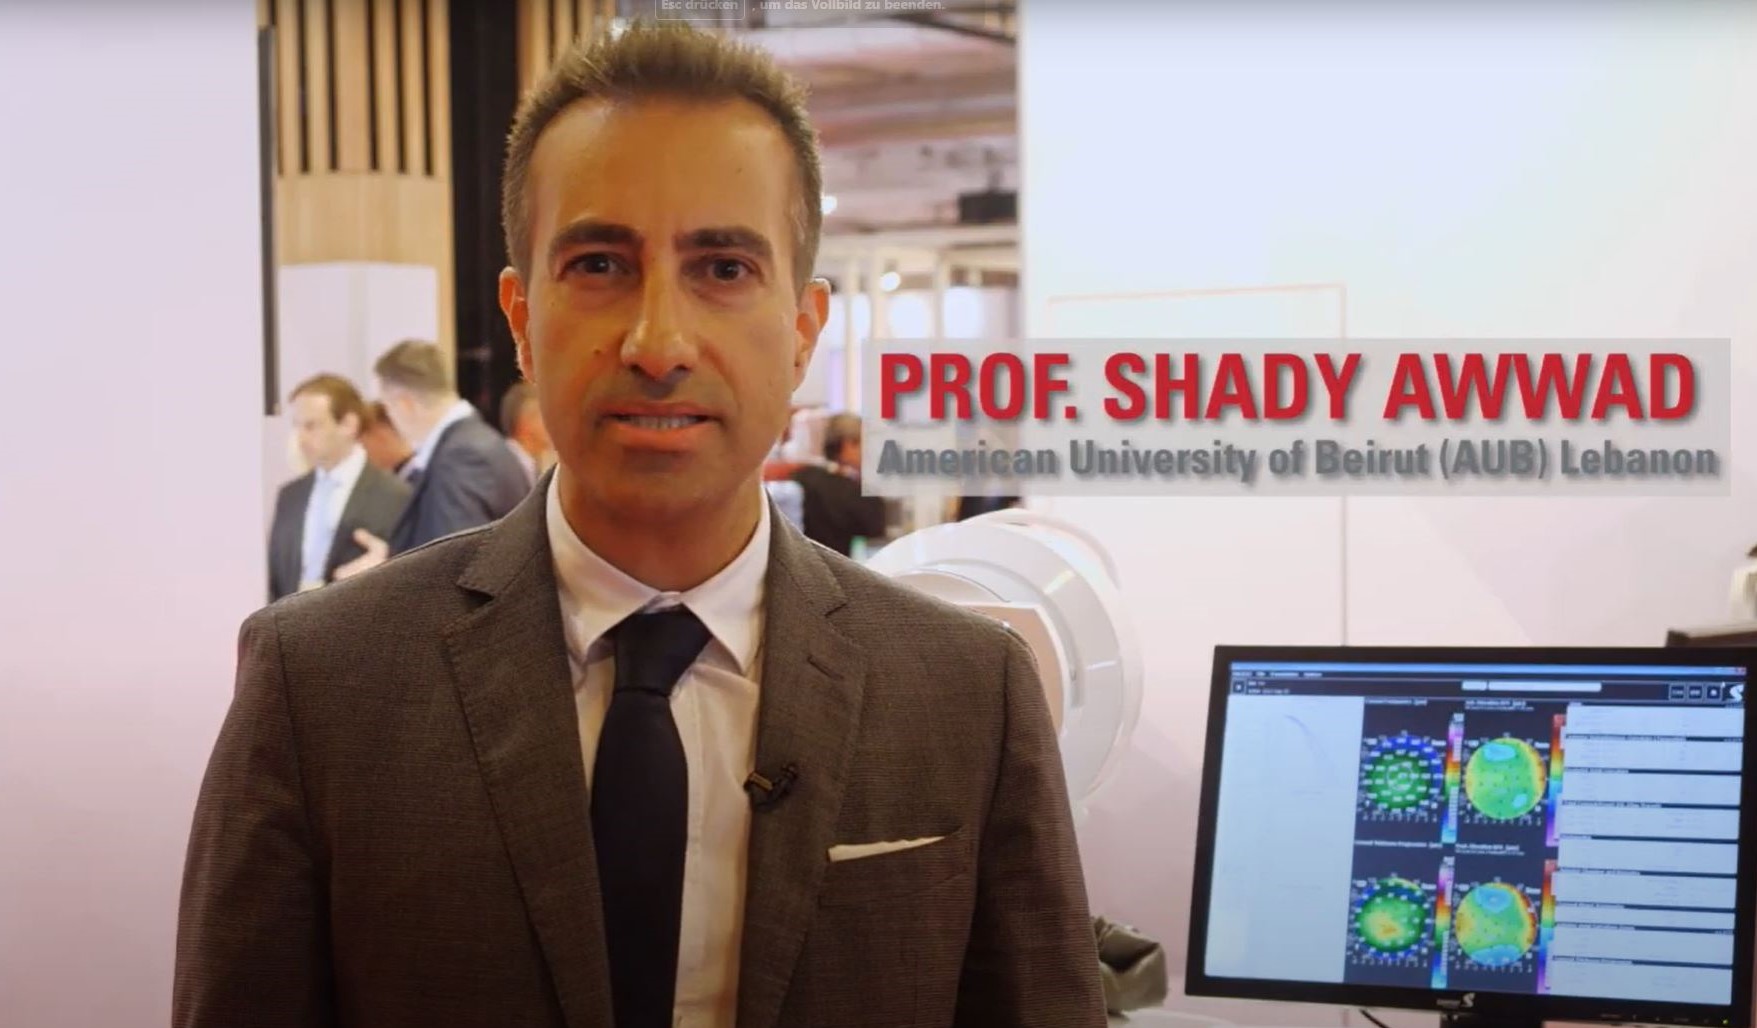 Prof. Shady Awwad explains how he uses the corneal thickness progression report. He also shares the reasons why GALILEI is his go-to tomographer for all patients seeking refractive surgery as well as for all of his post-refractive patients.